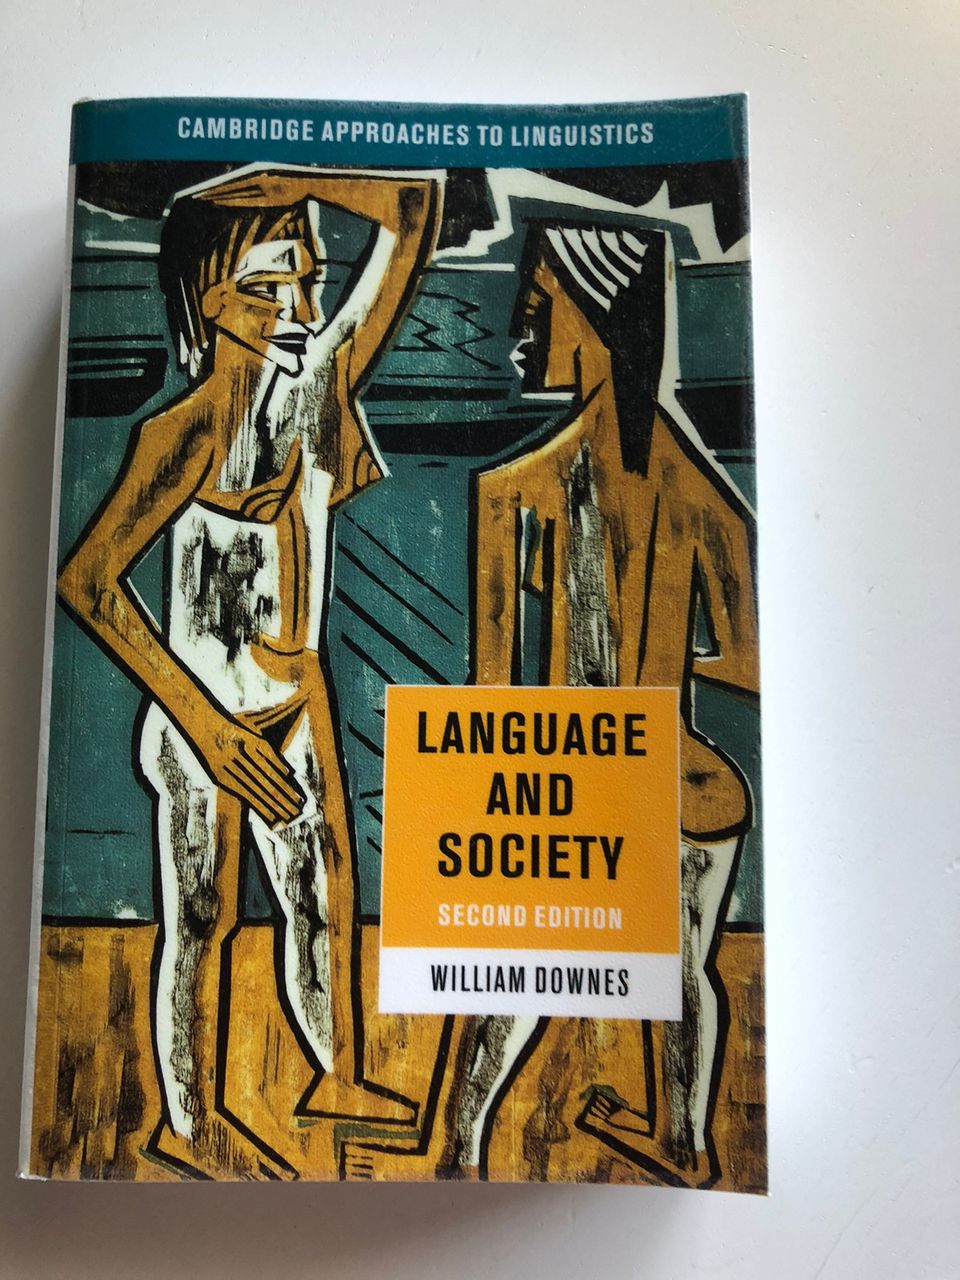 Language and society, William Downes